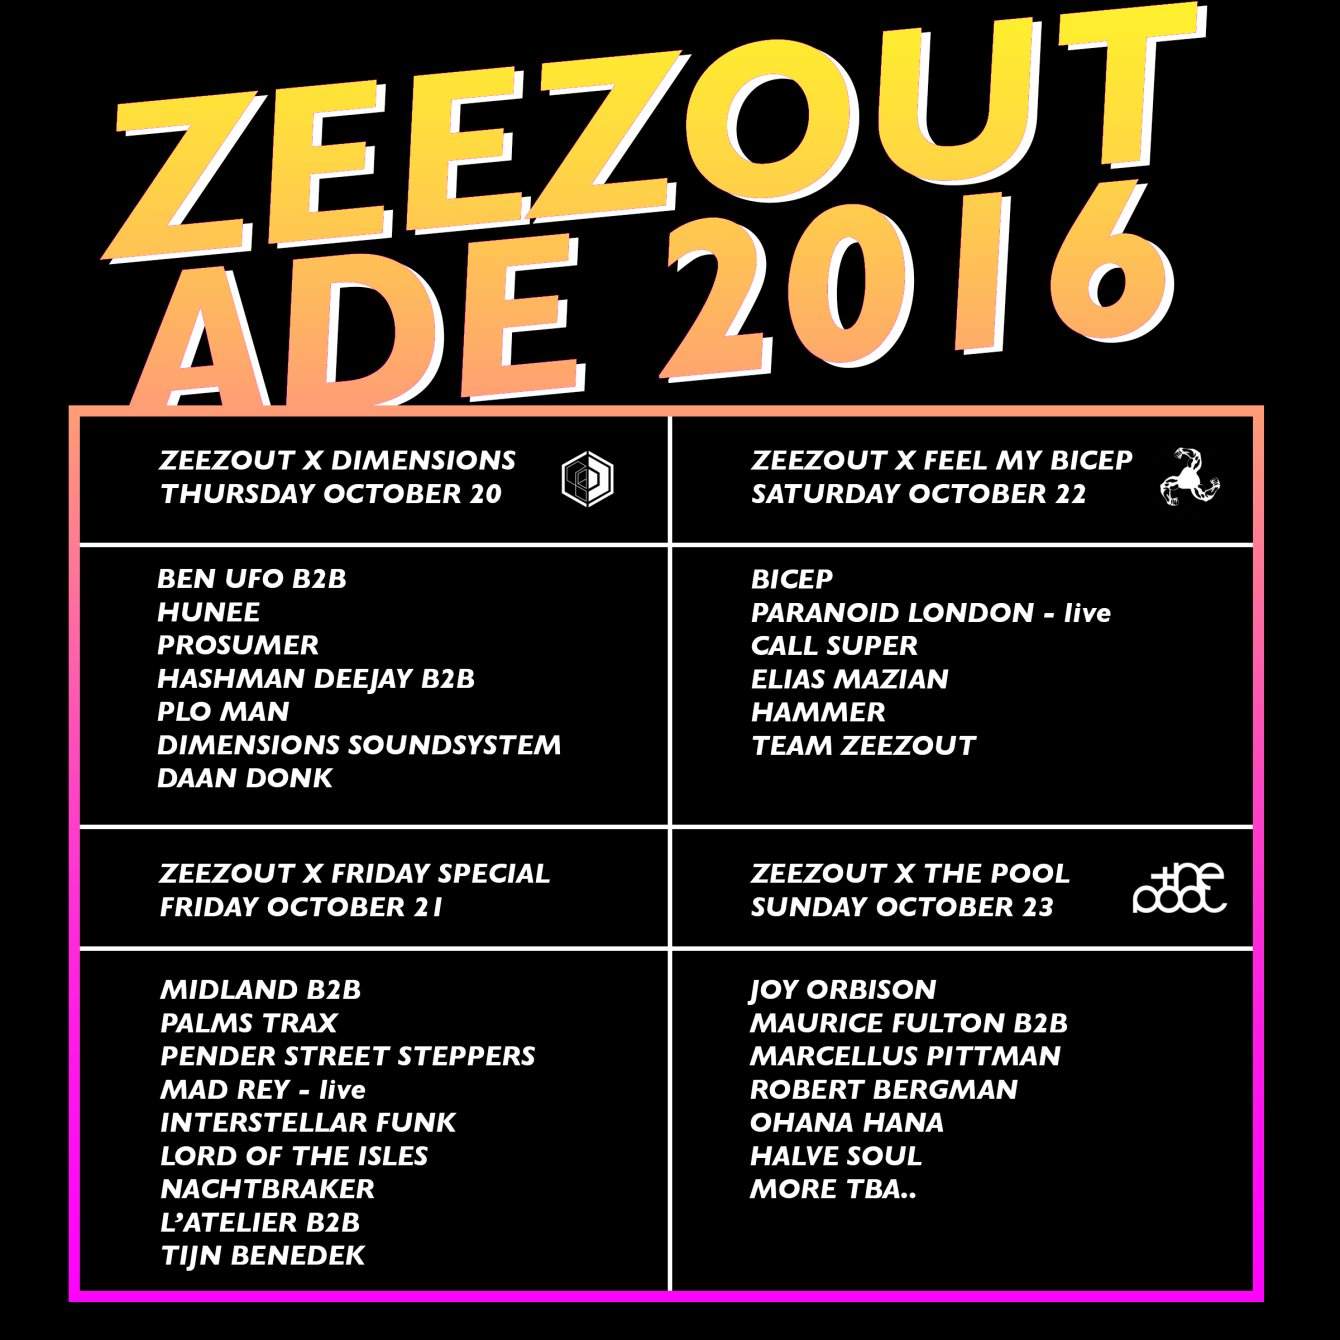 Zeezout ADE 2016: Midland, Palms Trax, Pender Street Steppers & More - Página frontal